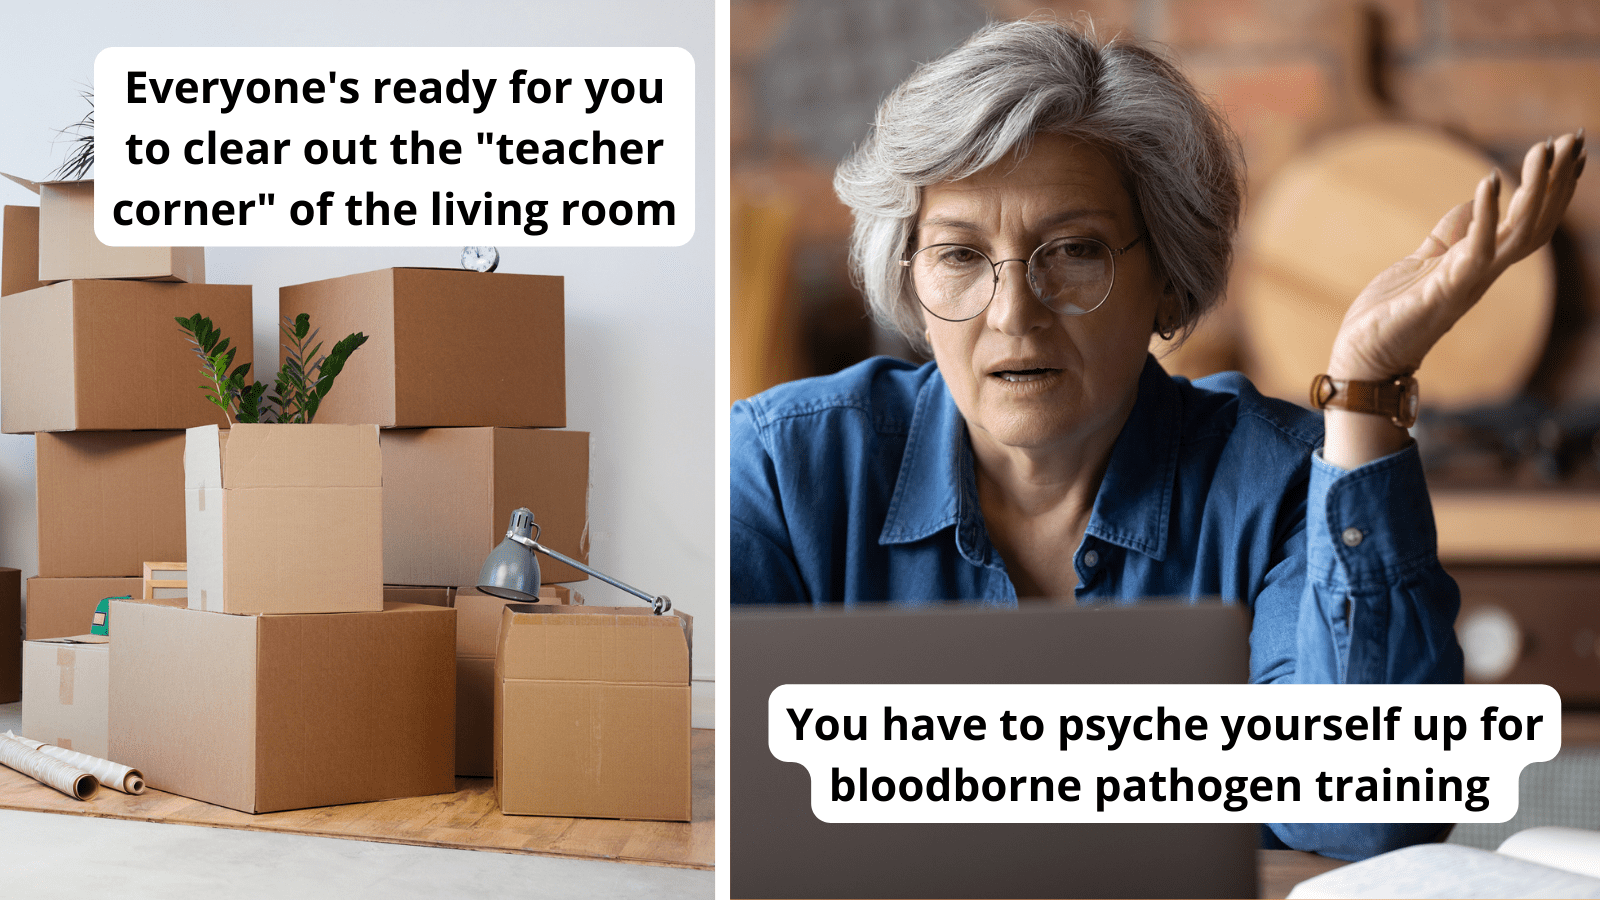 Paired image of moving boxes and a teacher annoyed at having to do bloodborne pathogen training